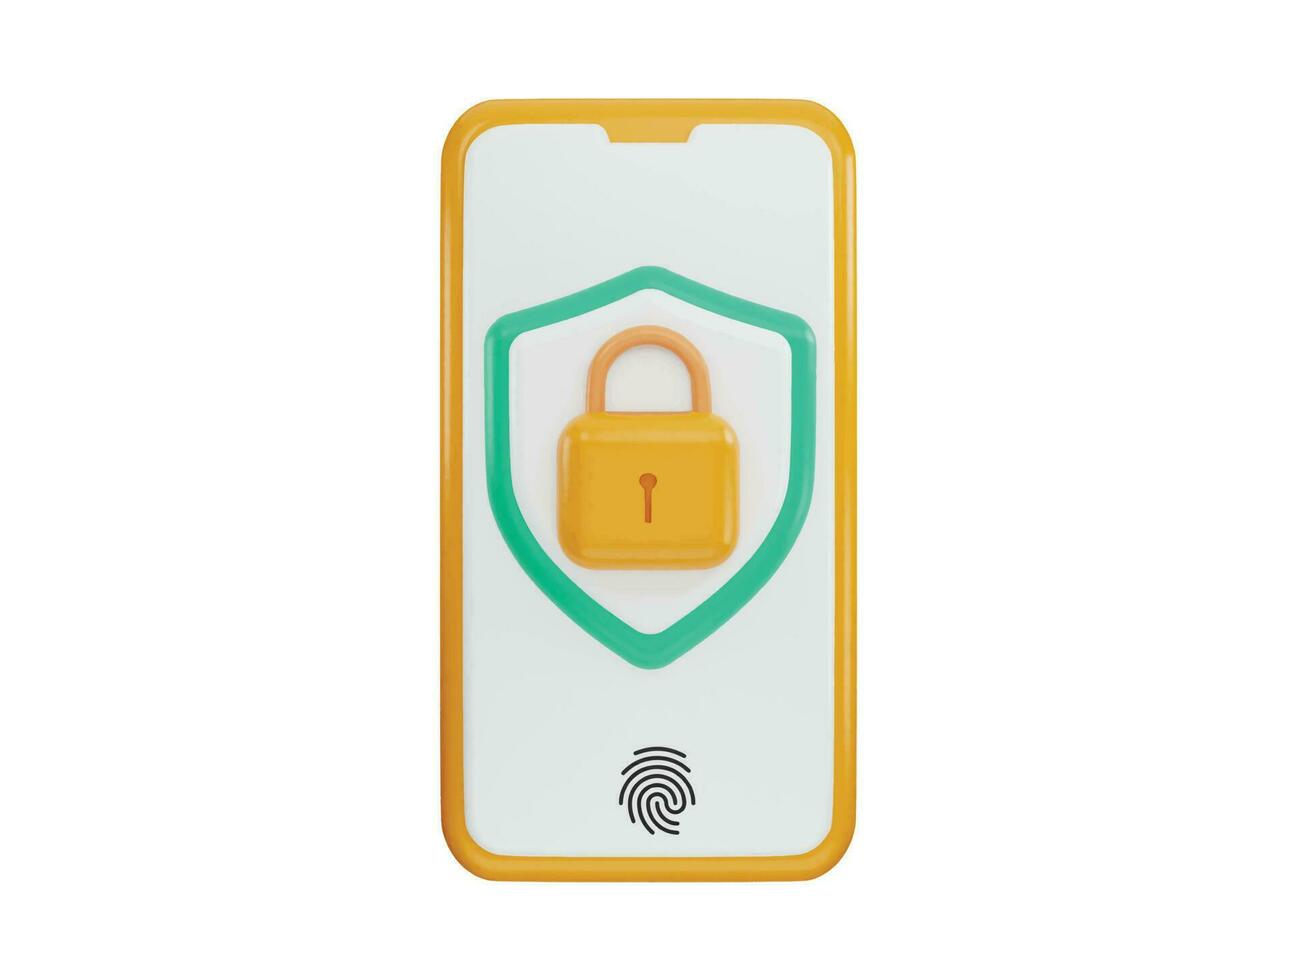 Phone with secure lock screen, data protection icon 3d rendering vector illustration